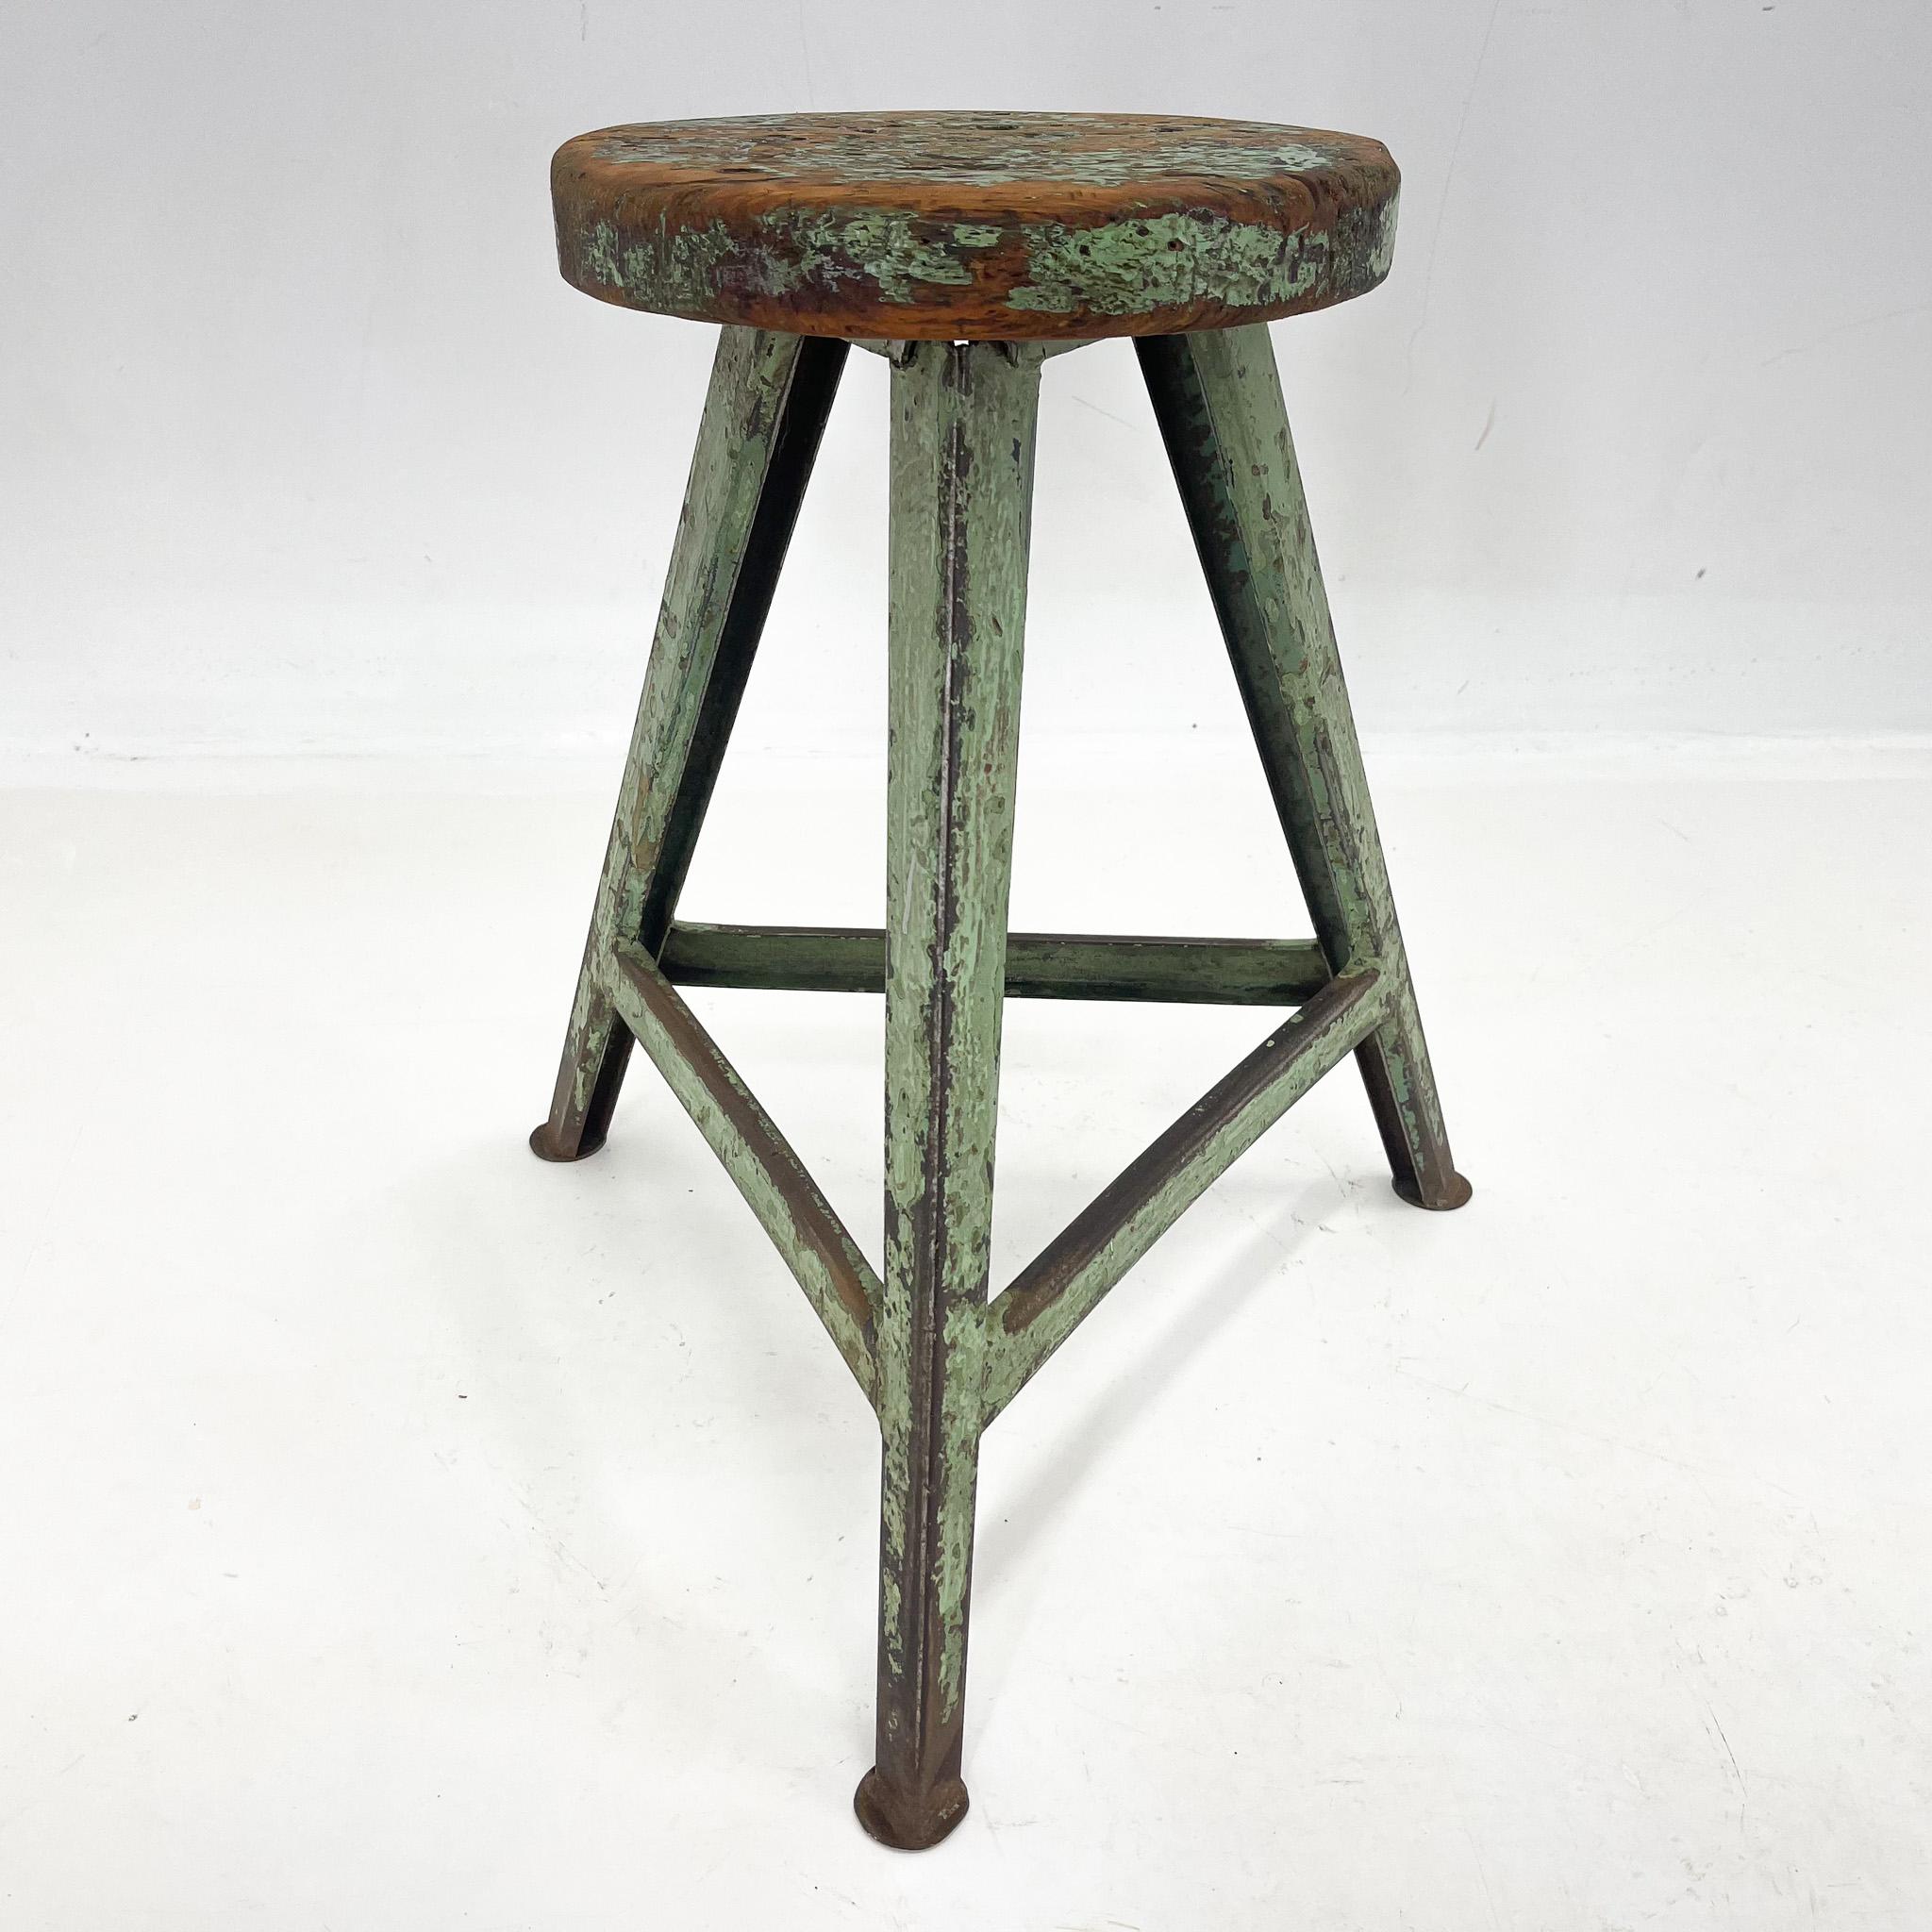 Czech Vintage Industrial Steel & Wood Tripod Stool with Original Patina, 1950s